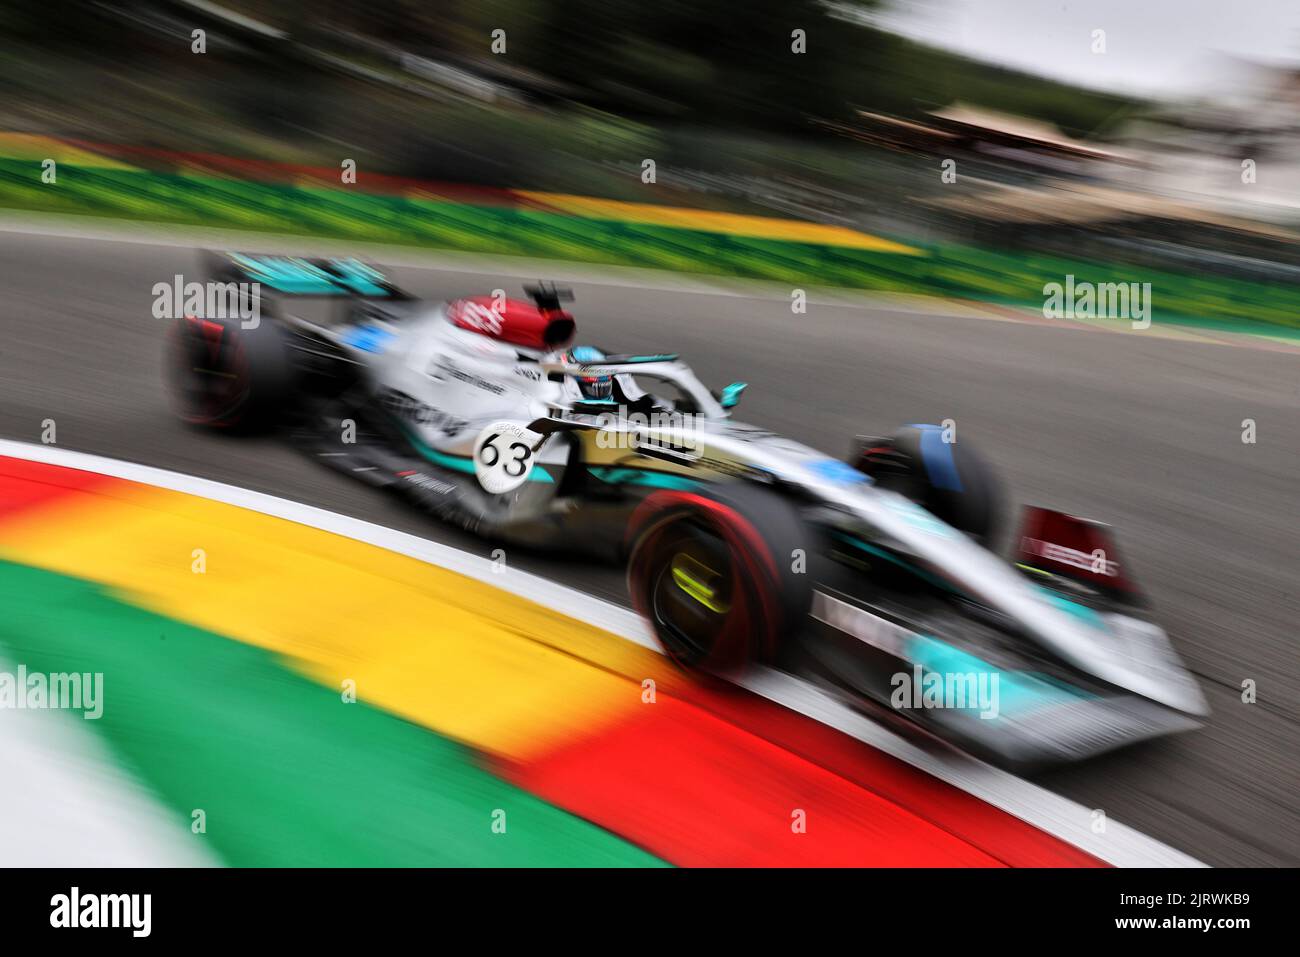 George Russell (GBR) Mercedes AMG F1 W13. Belgian Grand Prix, Friday 26th August 2022. Spa-Francorchamps, Belgium. Stock Photo